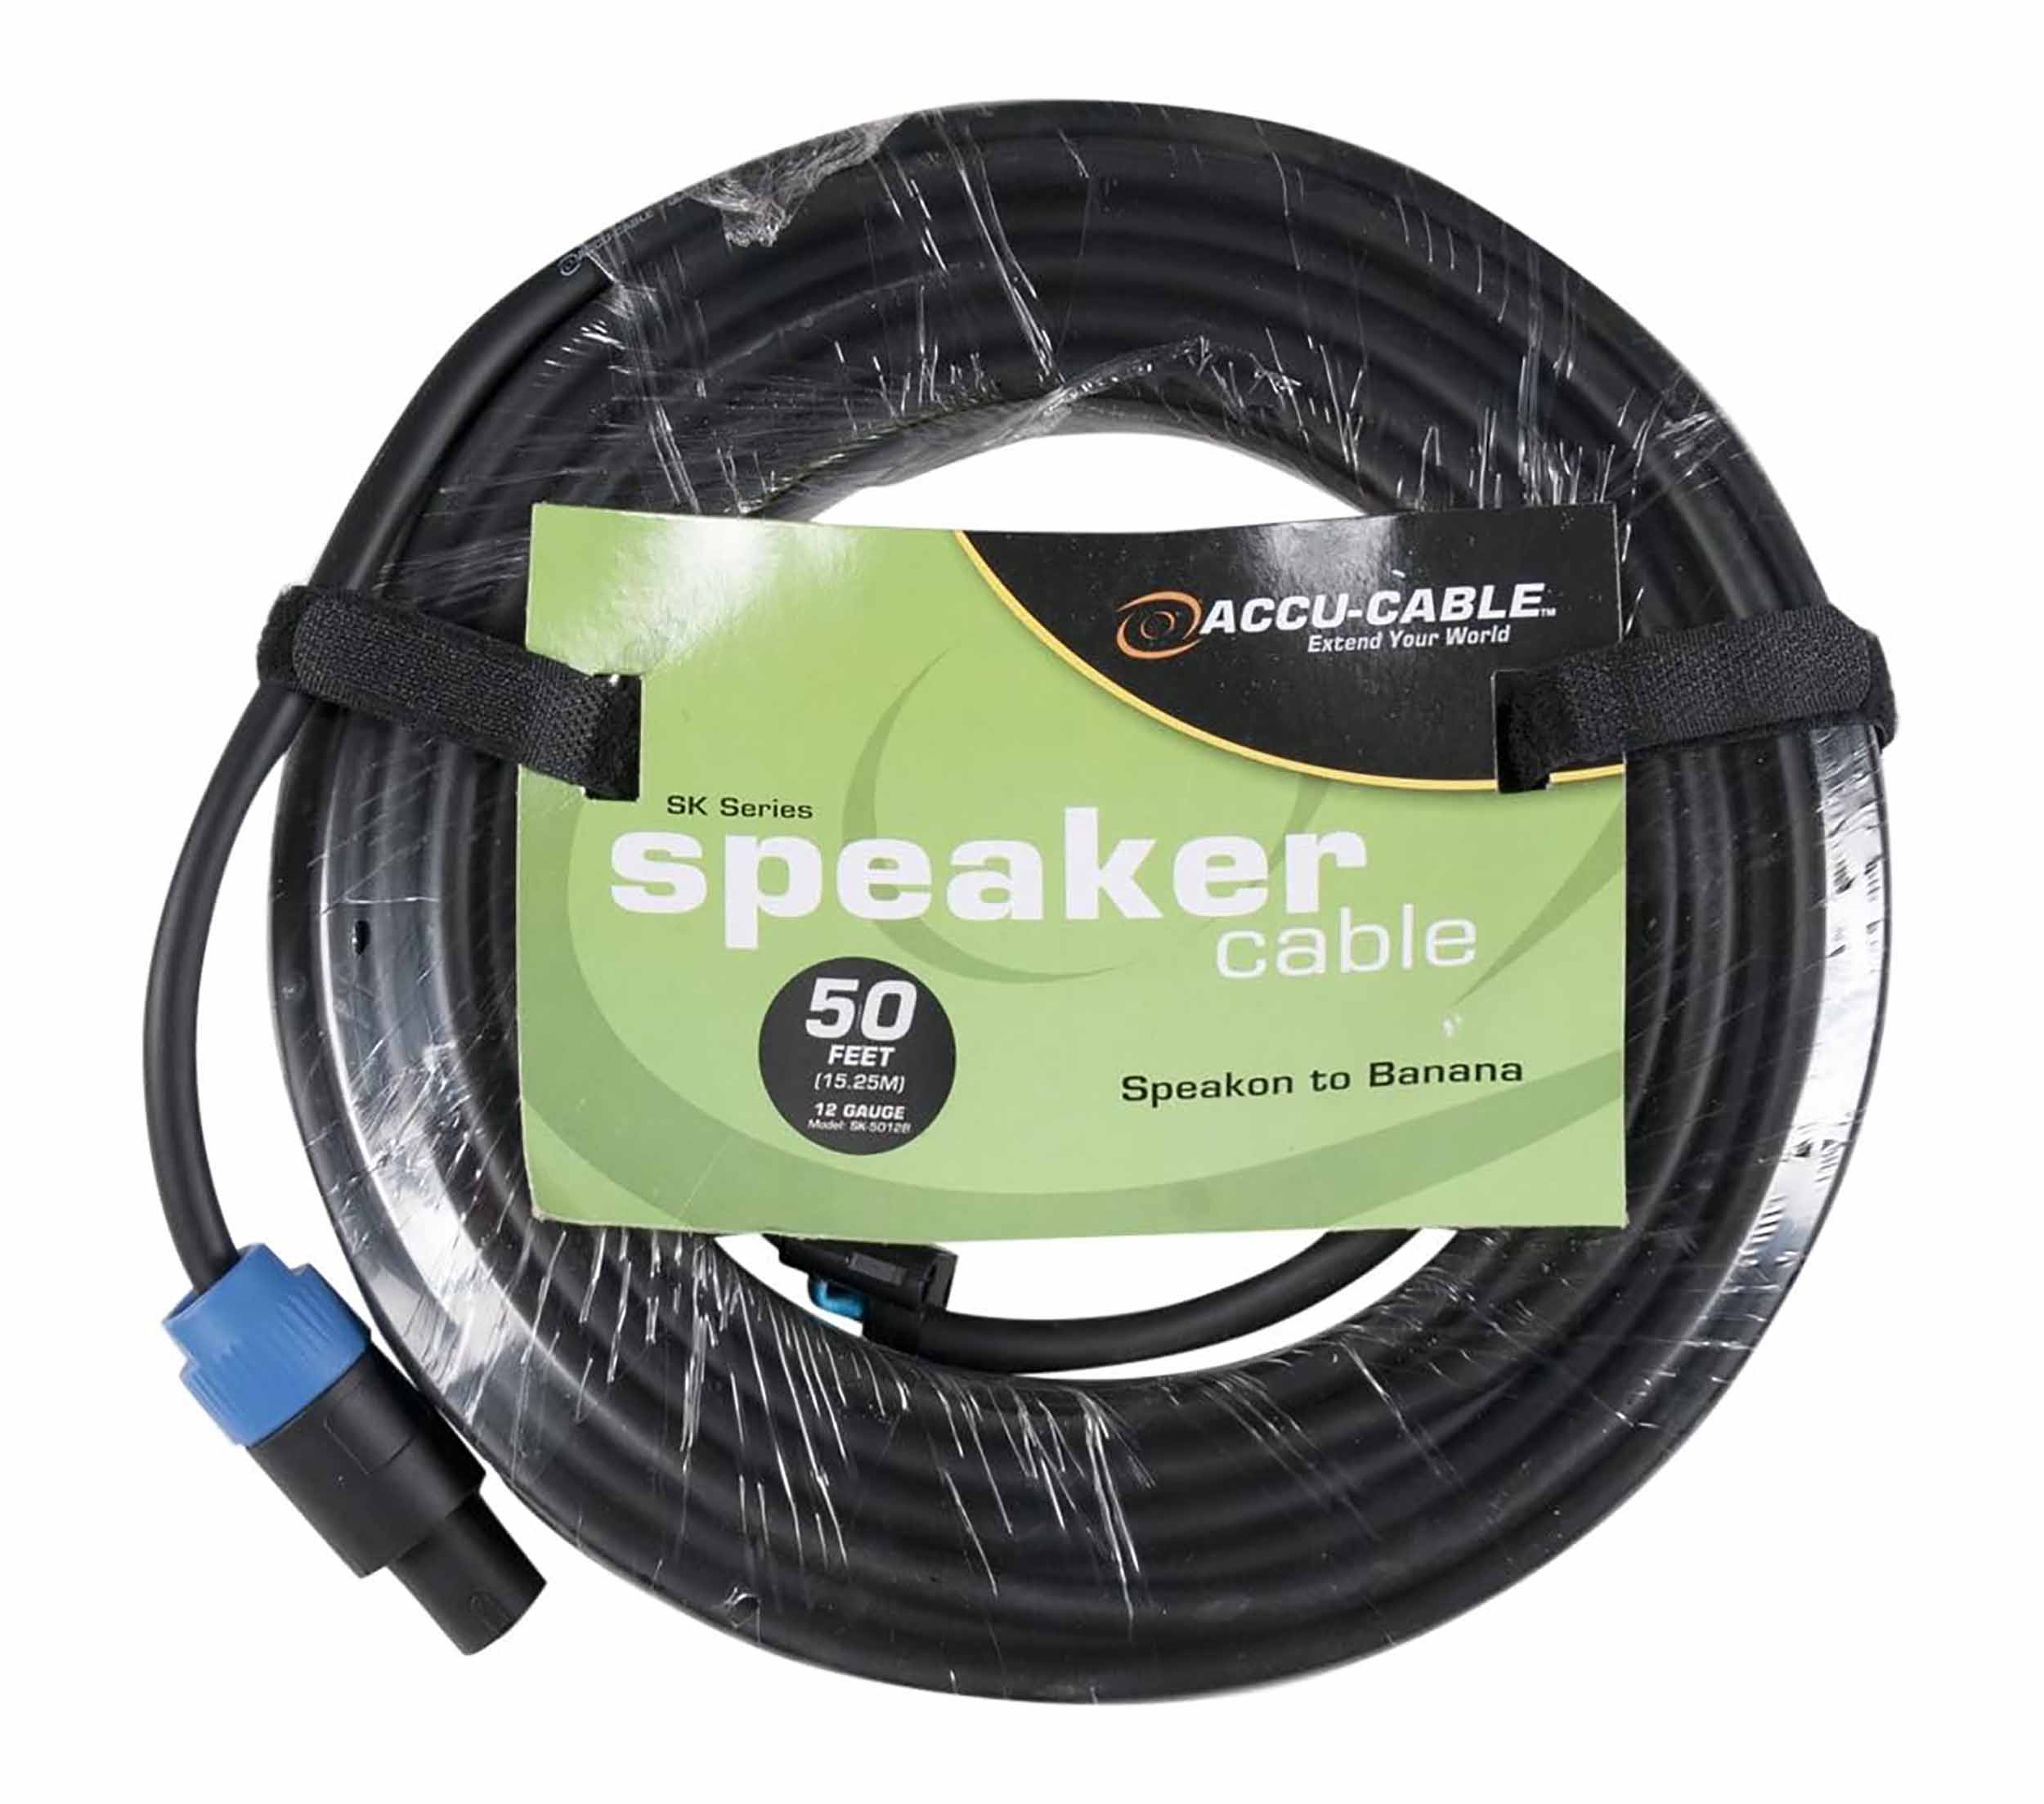 Accu-Cable SK-5012B, 12-Gauge Professional Locking Speaker Cable to Banana Plug - 50 Ft by Accu Cable